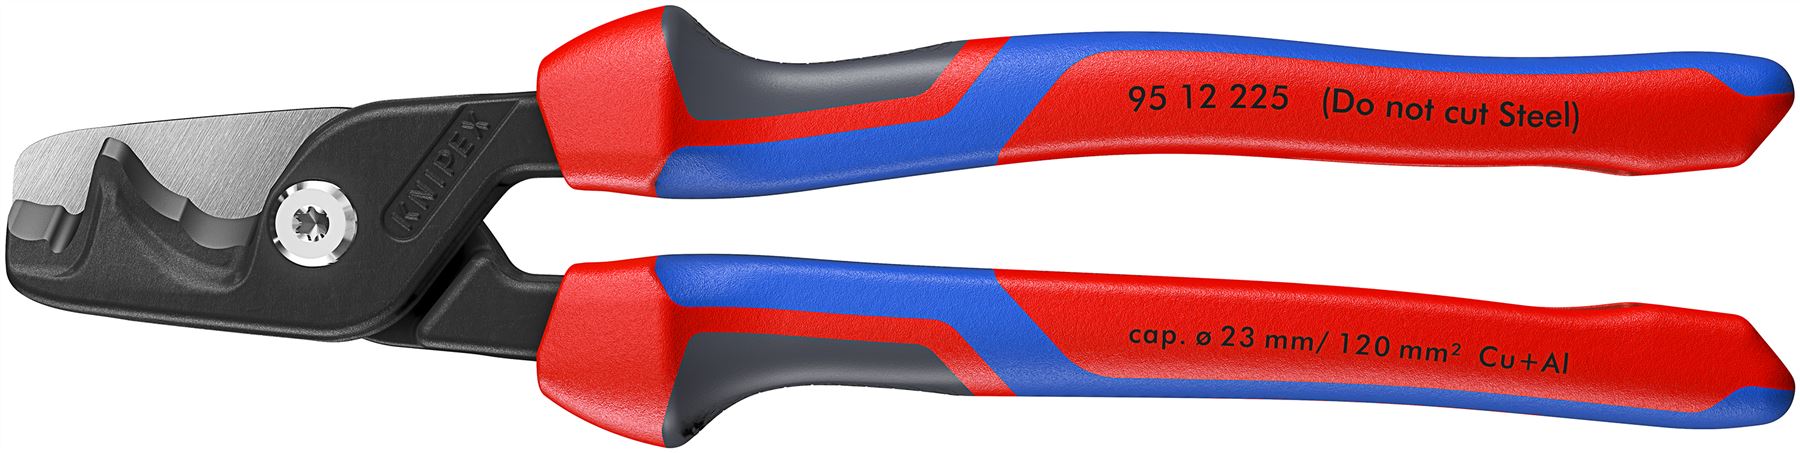 KNIPEX StepCut XL Cable Shears Cutting Pliers 225mm Comfort Handles 95 12 225